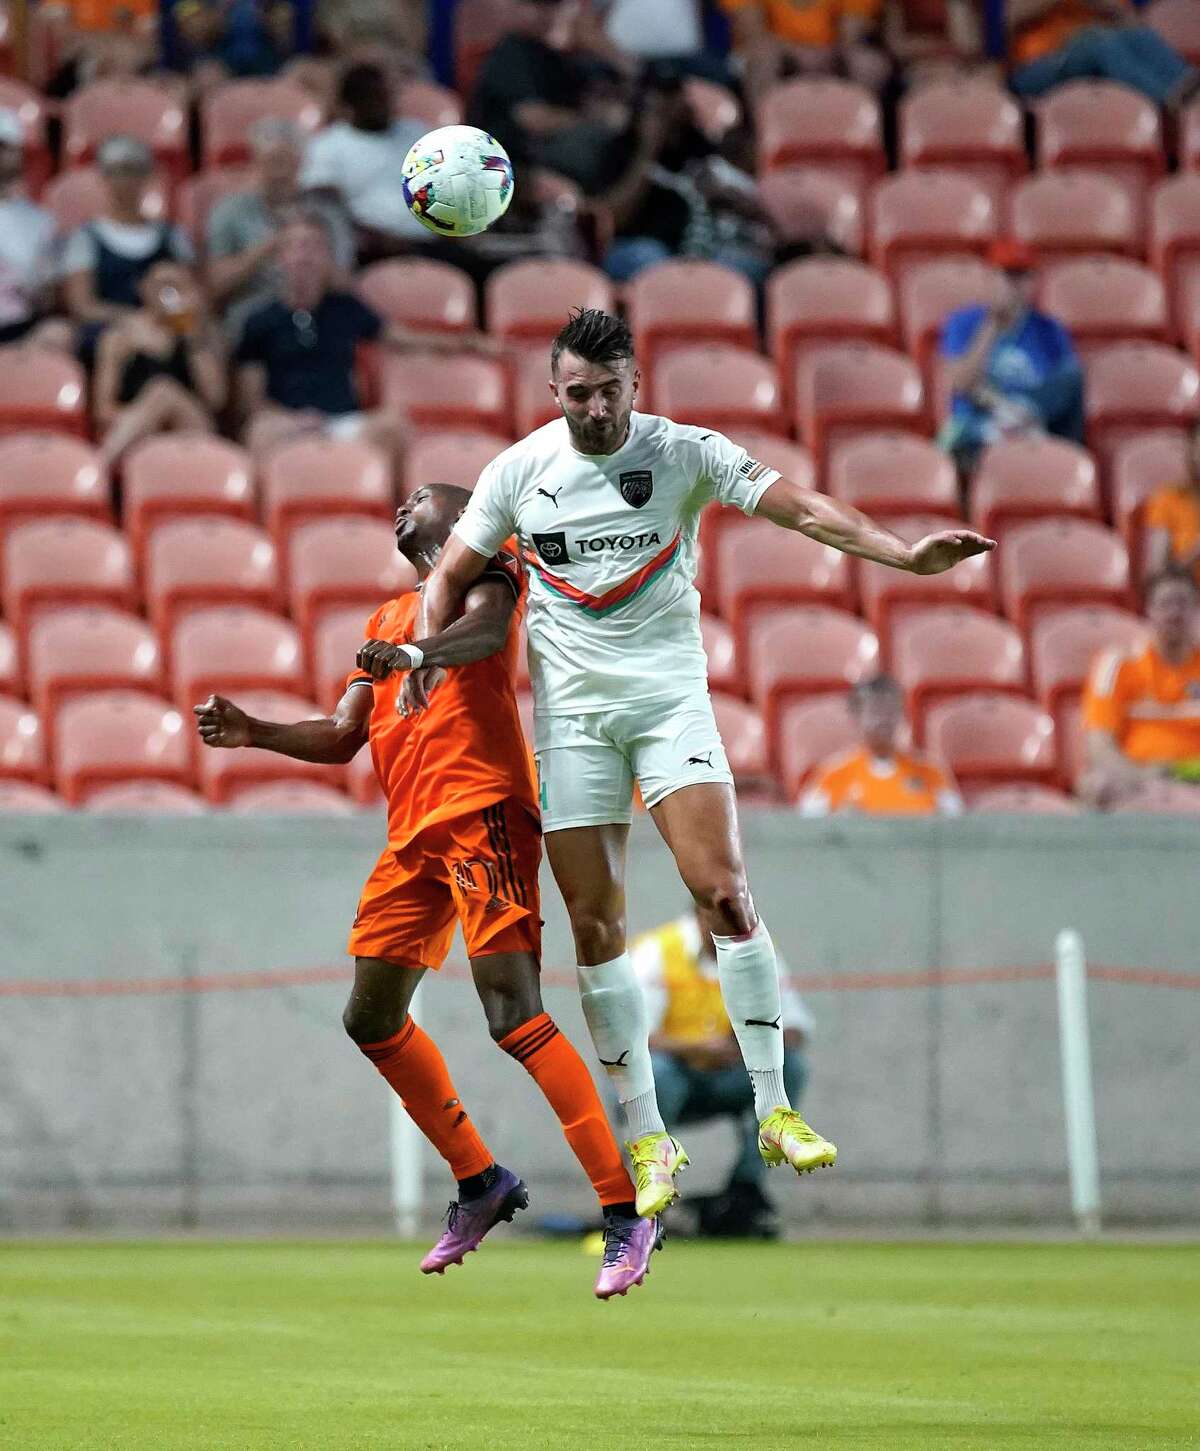 San Antonio FC defender Fabien Garcia (4) and Houston Dynamo midfielder Fafà Picault (10) go up against each other on a header during the first half of the U.S. Open Cup soccer match at PNC Stadium on Wednesday, May 11, 2022 in Houston.